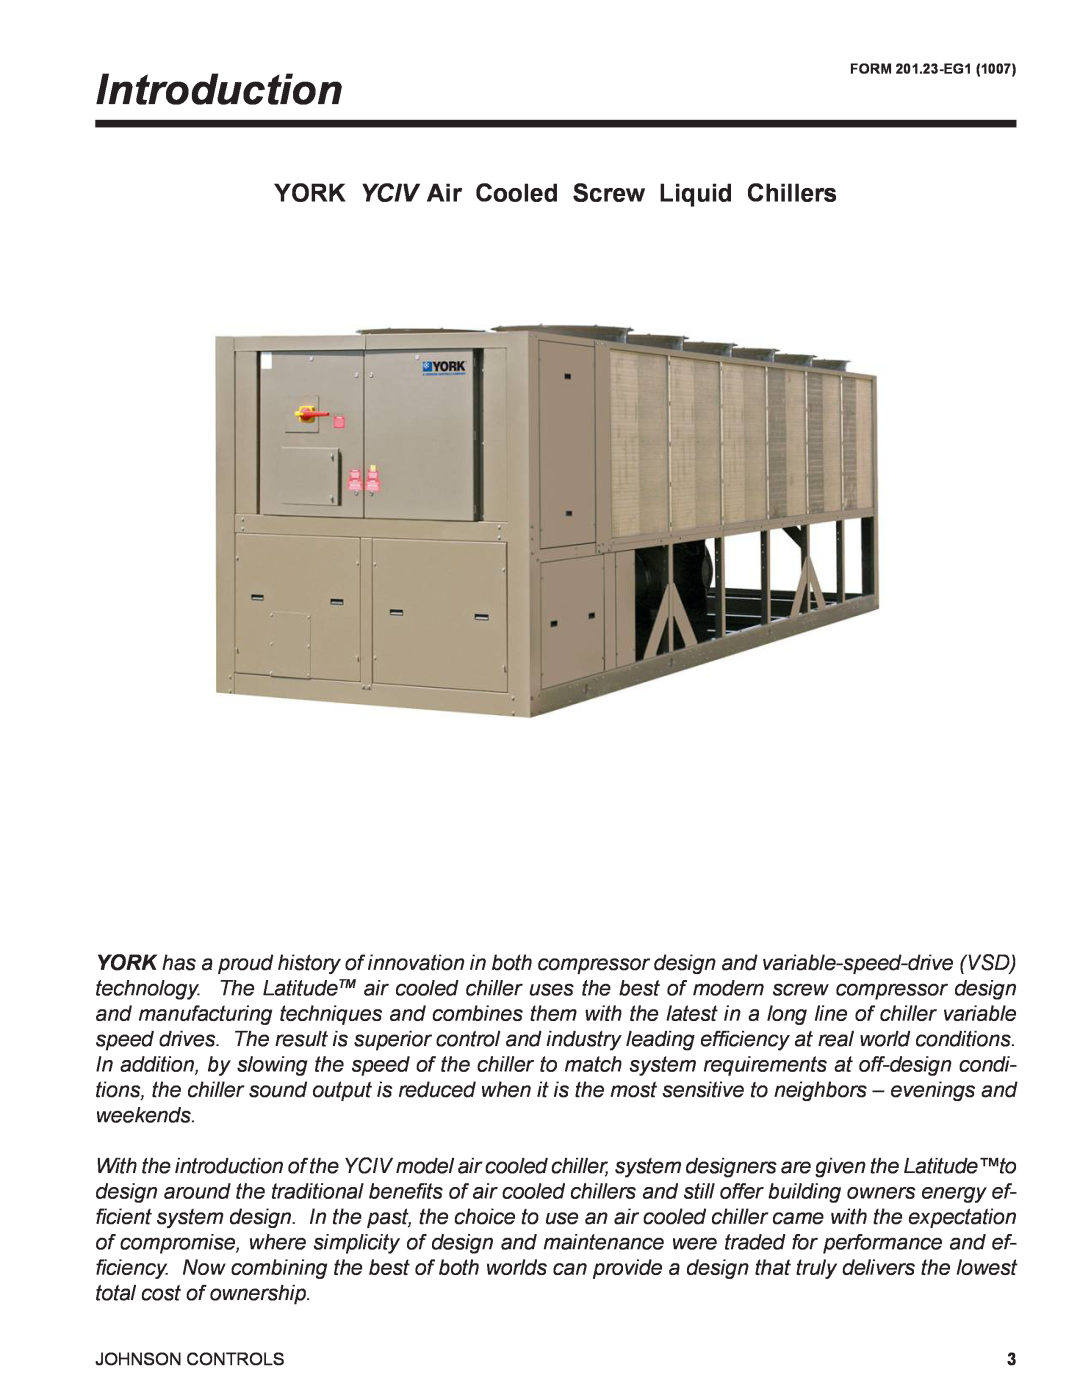 York R134A manual Introduction, YORK YCIV Air Cooled Screw Liquid Chillers 